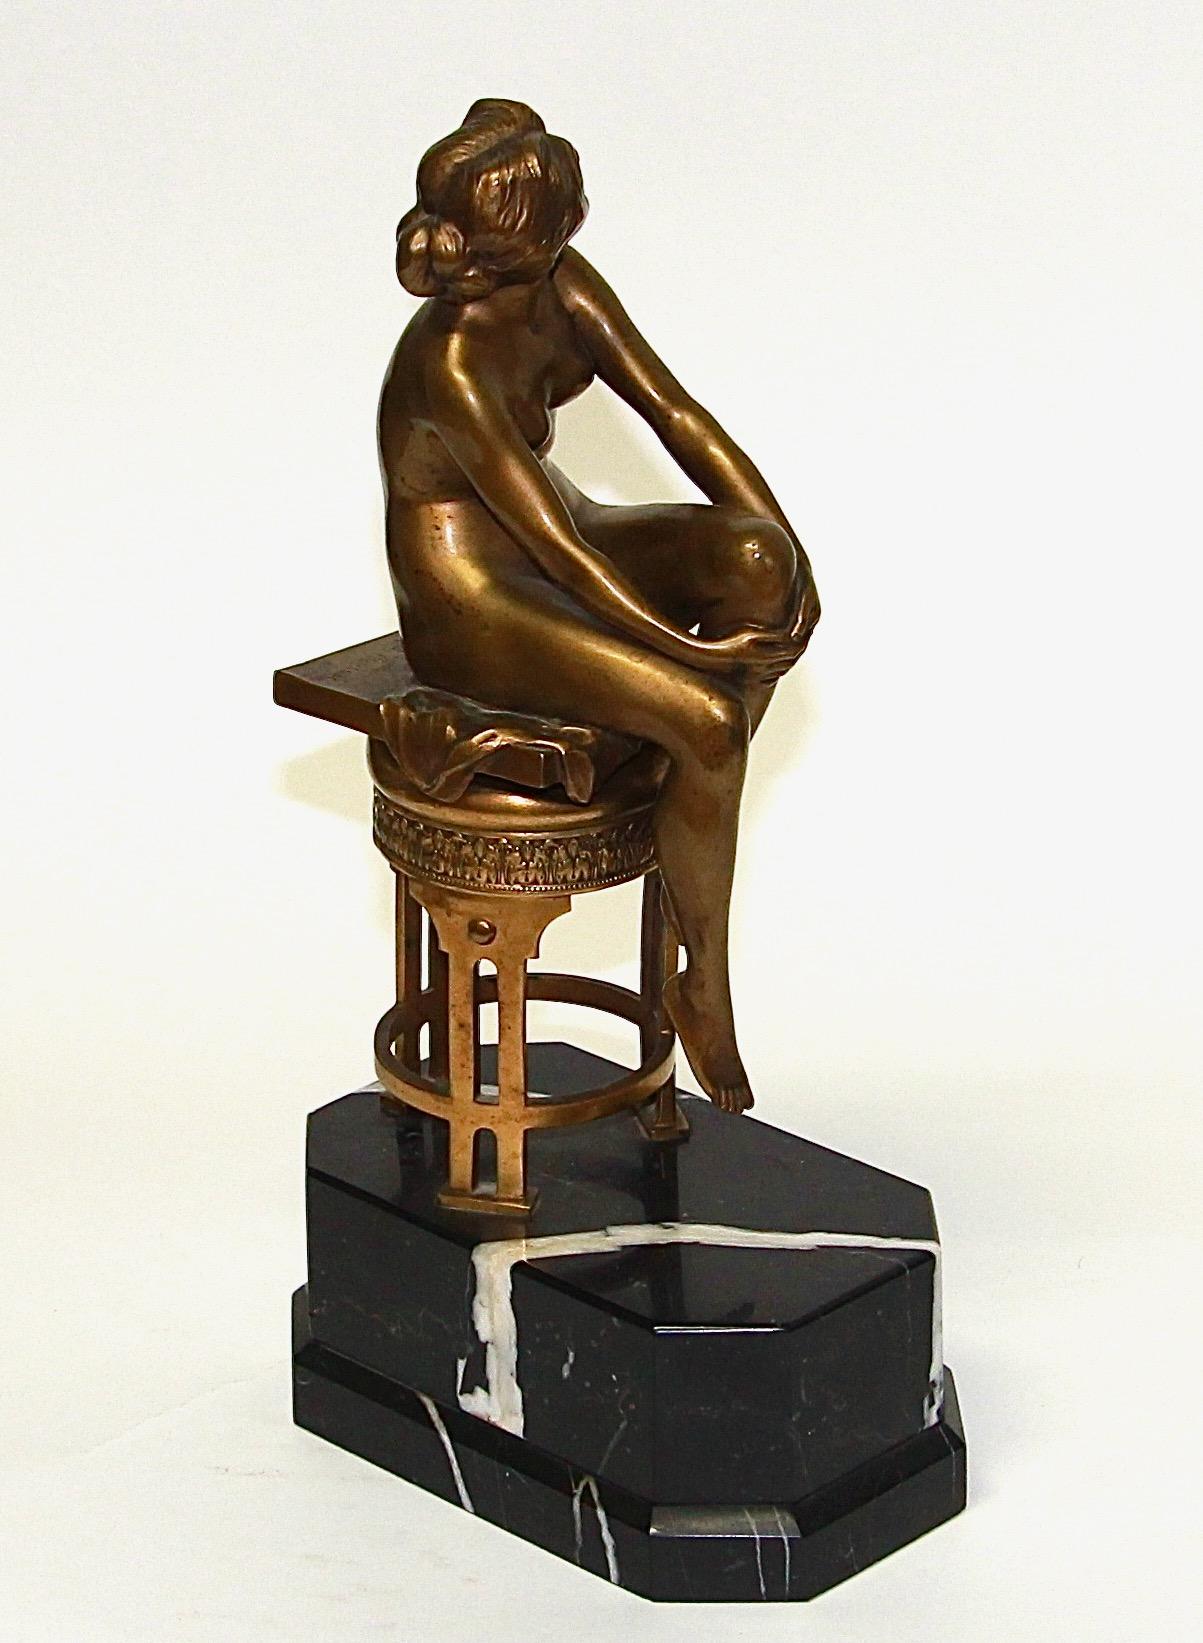 Decorative female bronze nude by Rudolf Marcuse. Sedentary beauty.

Signed and with foundry mark Gladenbeck.

The lower part (fire-gilded) of the sculpture is most likely not part of the nude, as it is another artist's signature